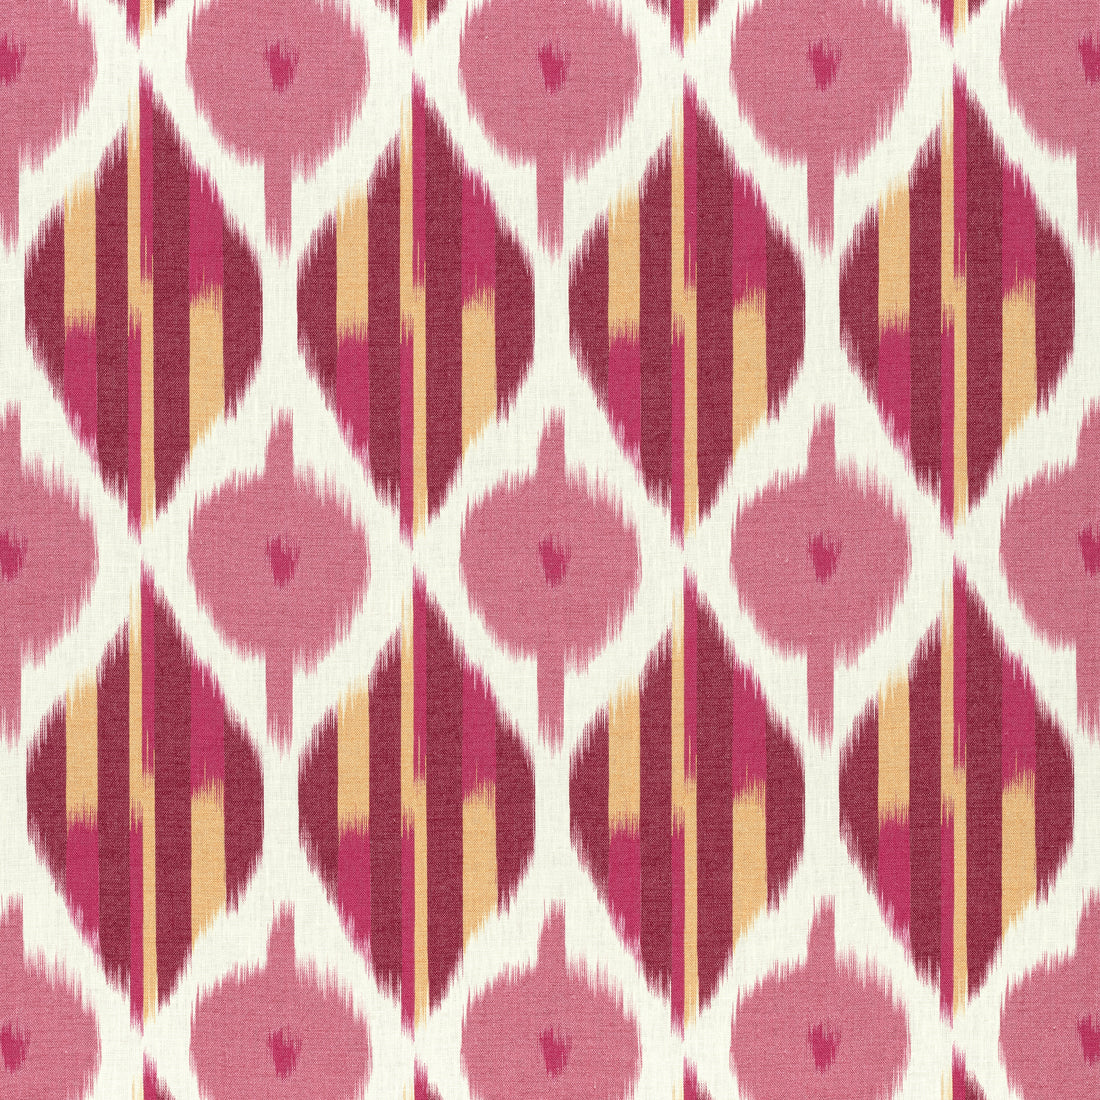 Kimono fabric in fuchsia color - pattern number AF9853 - by Anna French in the Nara collection